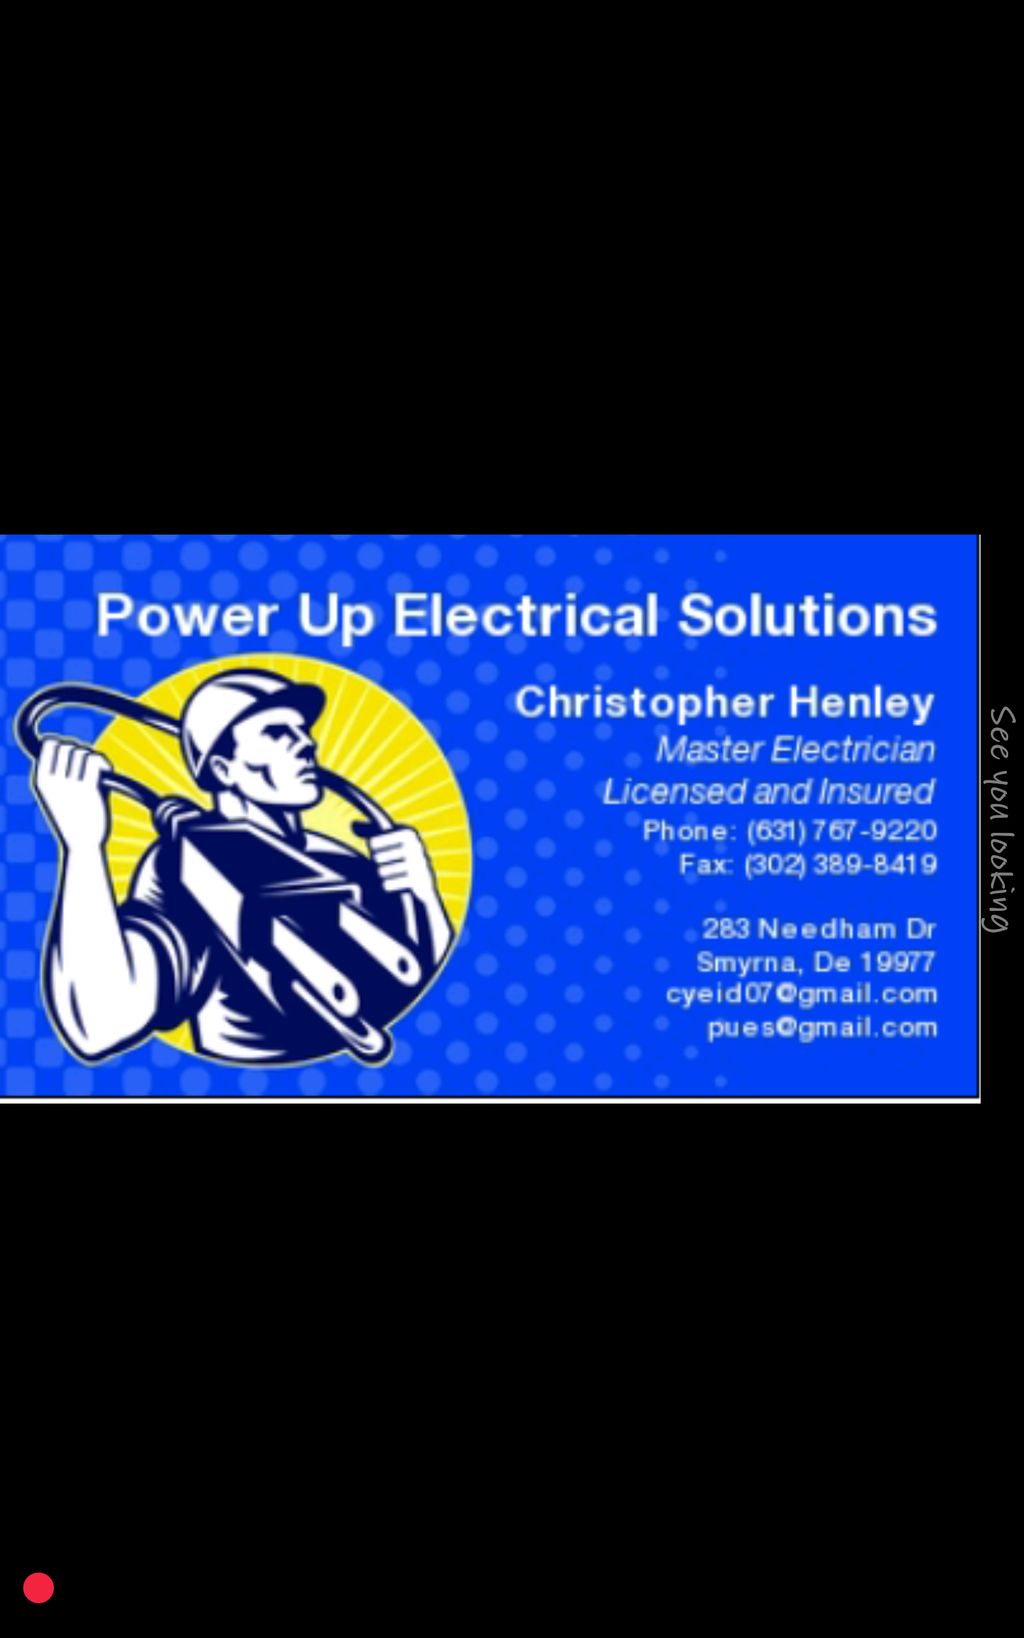 Power Up Electrical Solutions